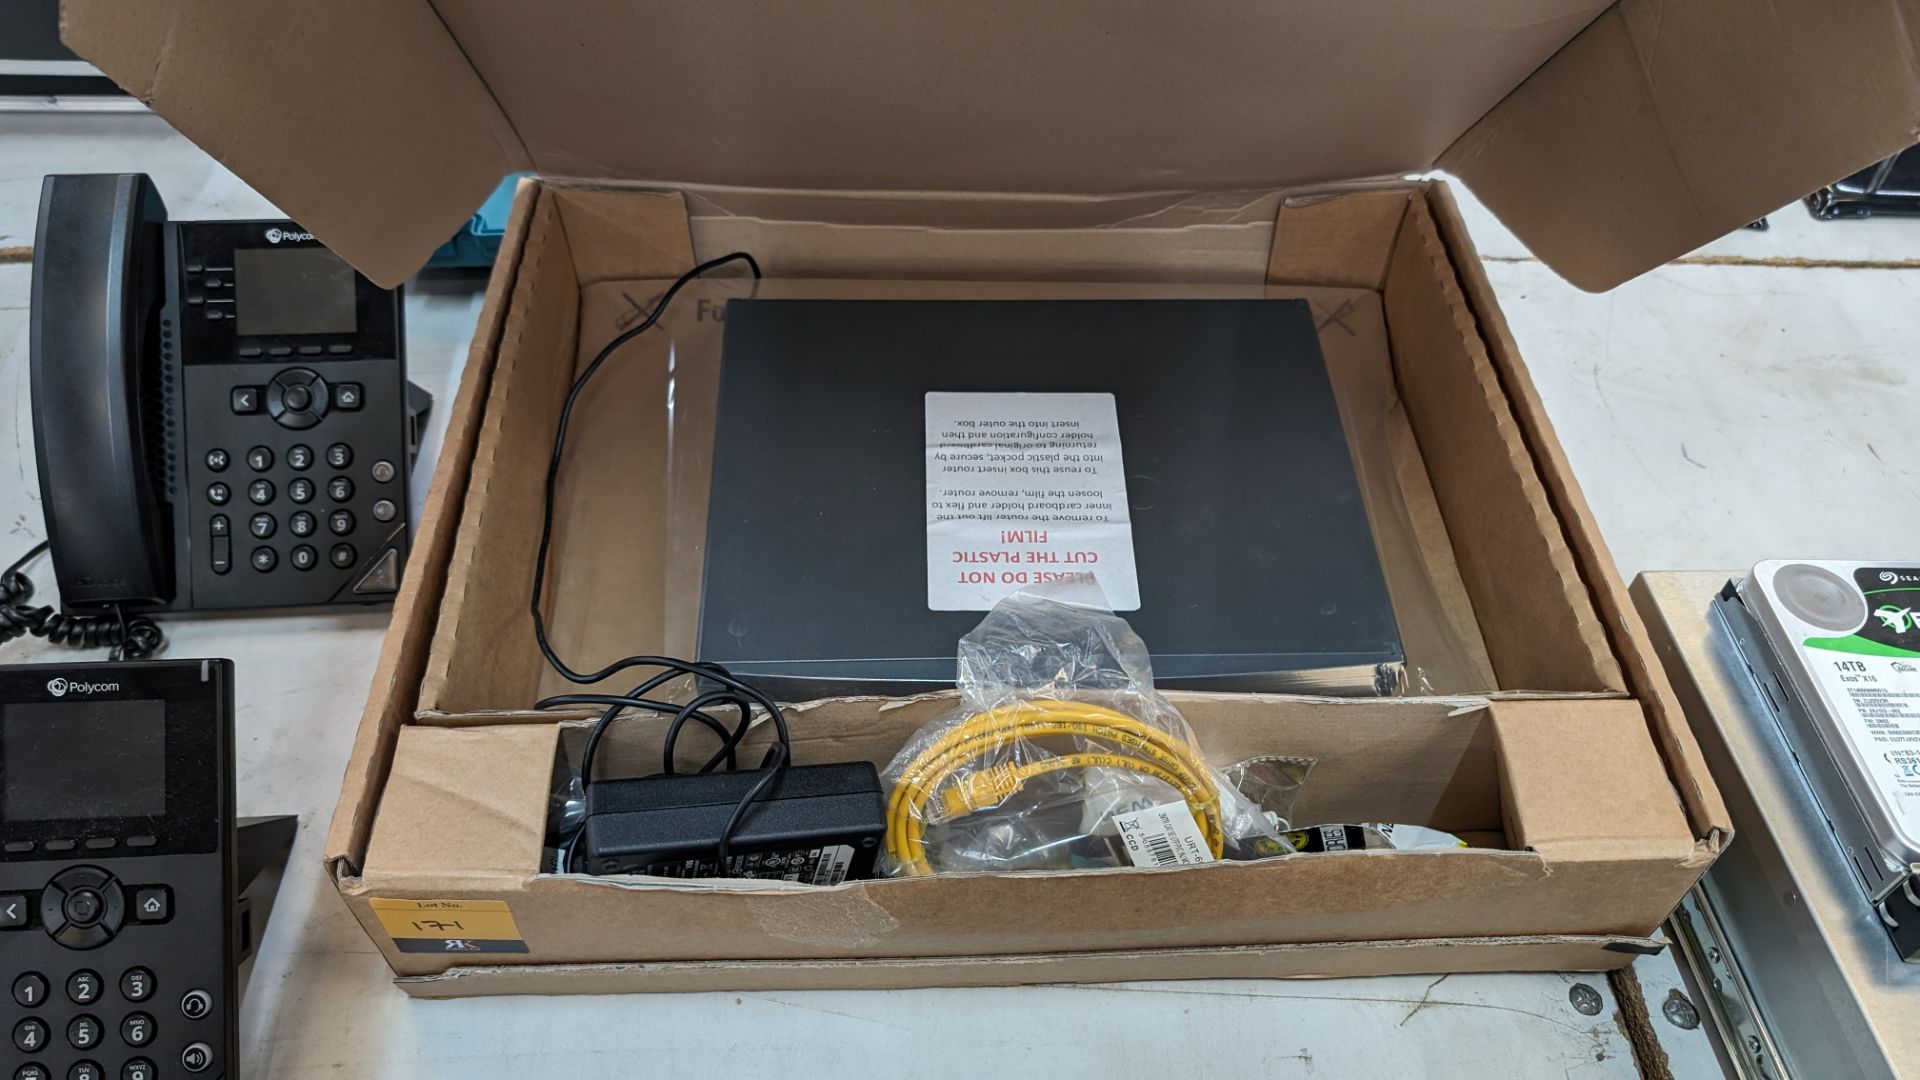 Cisco 887VAM broadband router including power pack & cables - appears to be new/unused - Image 8 of 8